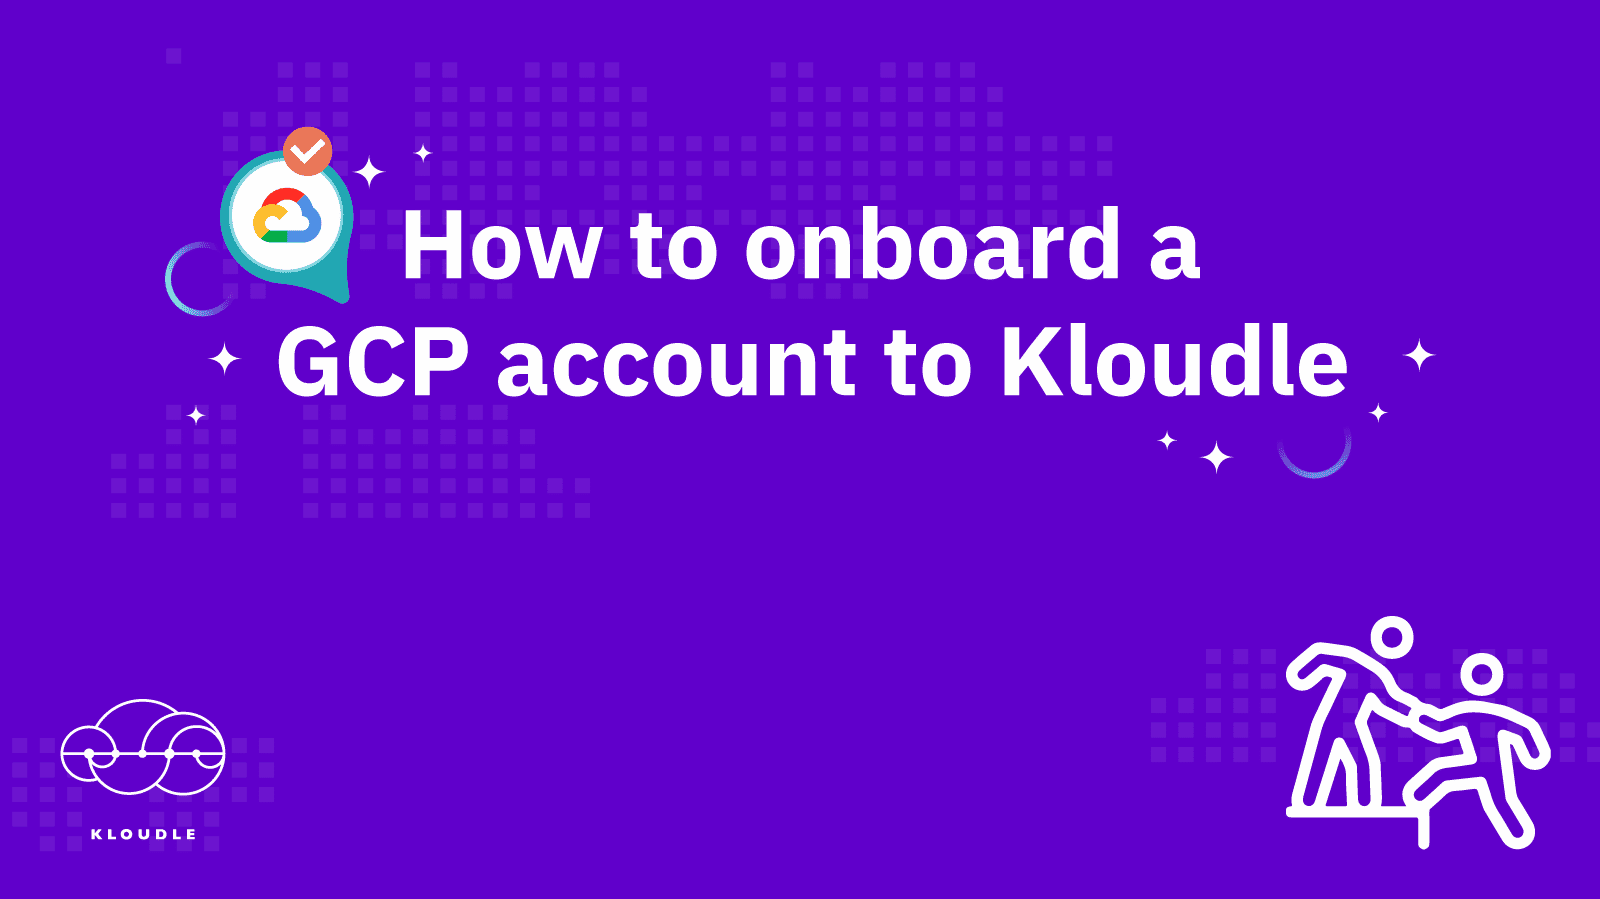 How to onboard a Google Cloud or GCP account to Kloudle